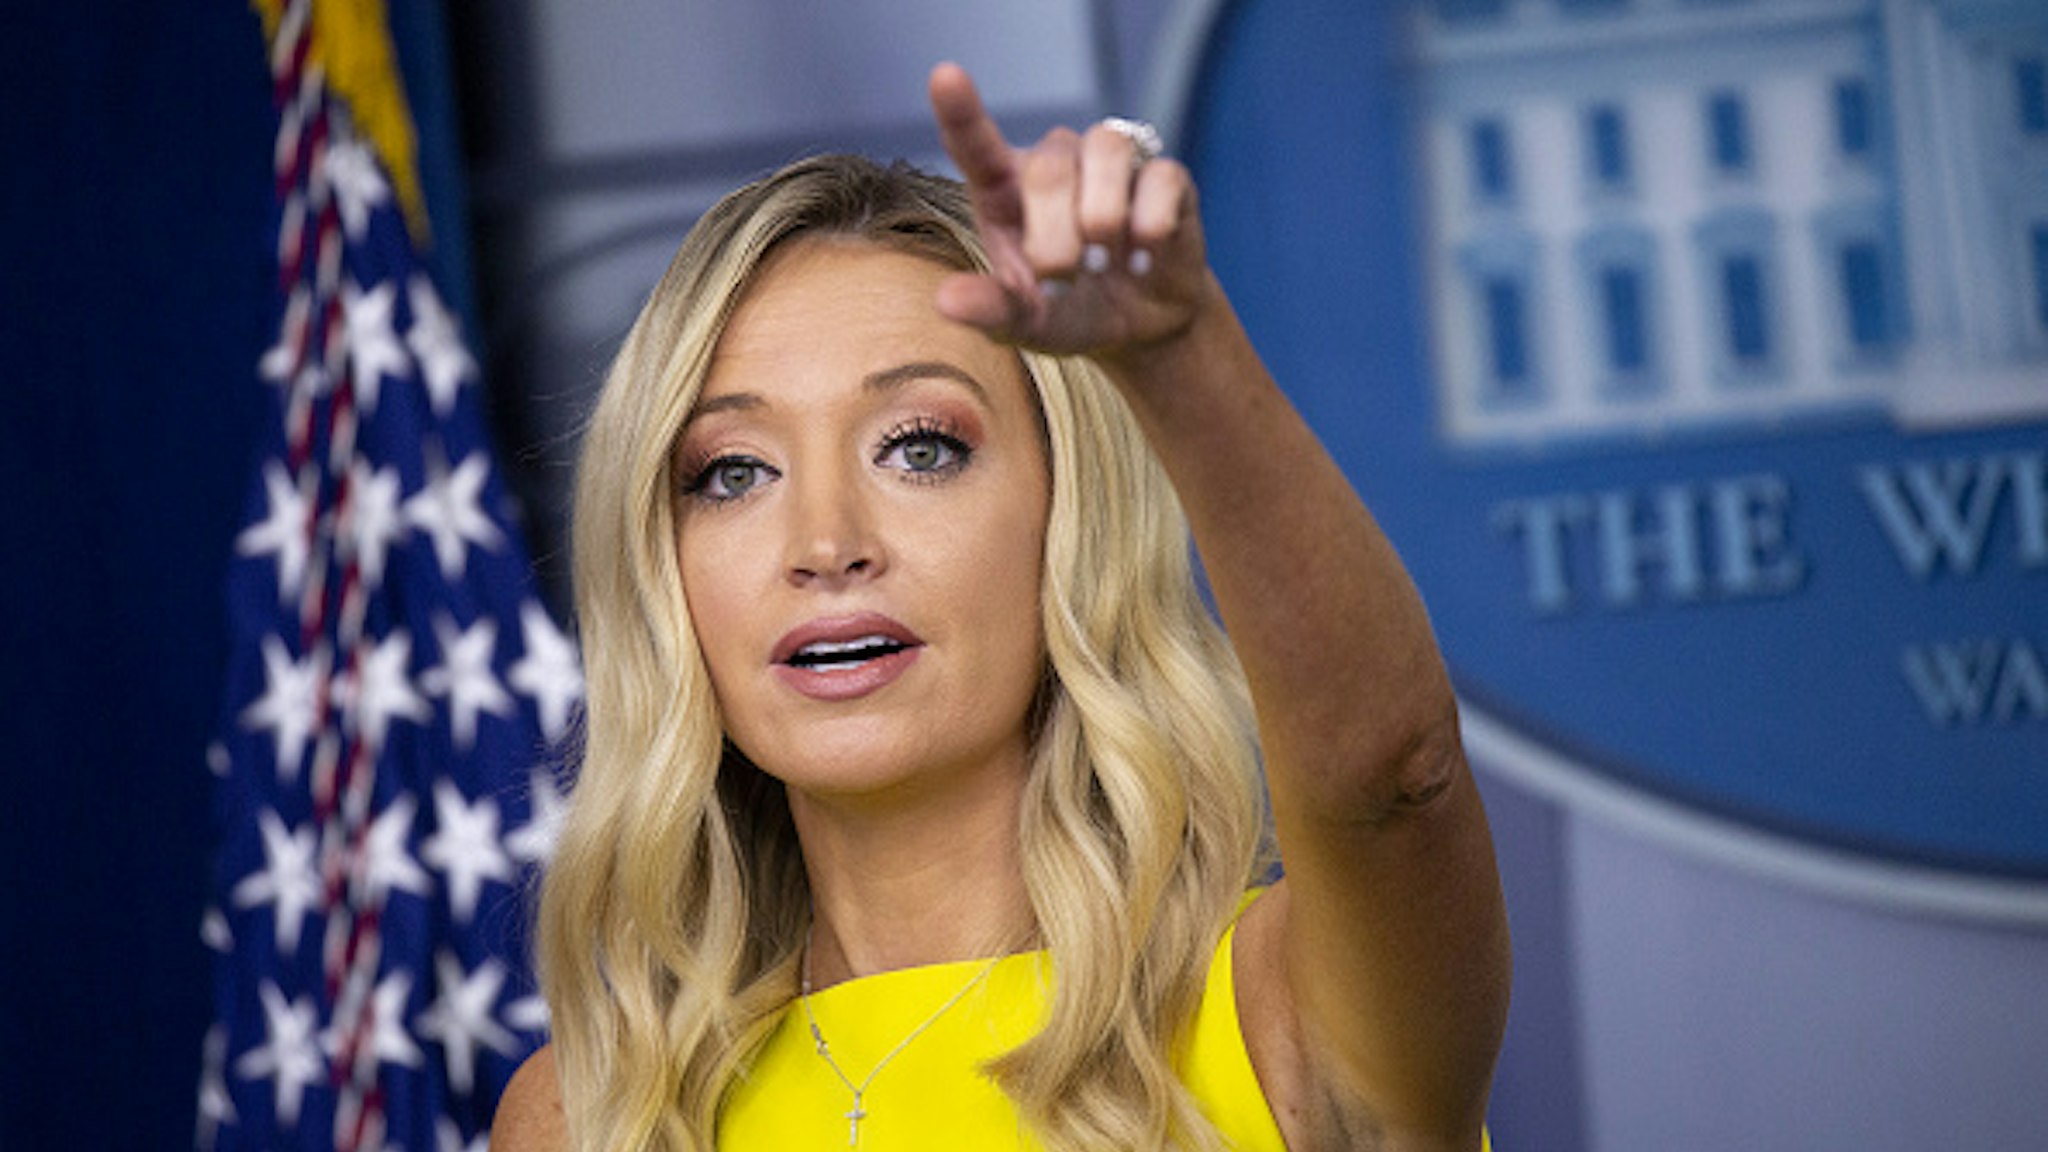 Kayleigh McEnany, White House press secretary, speaks during a news conference in the James S. Brady Press Briefing Room at the White House in Washington, D.C., U.S., on Monday, Aug. 10, 2020. President Donald Trump urged a judge to block a New York grand jury from reviewing his tax filings and disputed a suggestion by the Manhattan District Attorney that the panel may be looking into bank and insurance fraud by the Trump Organization.